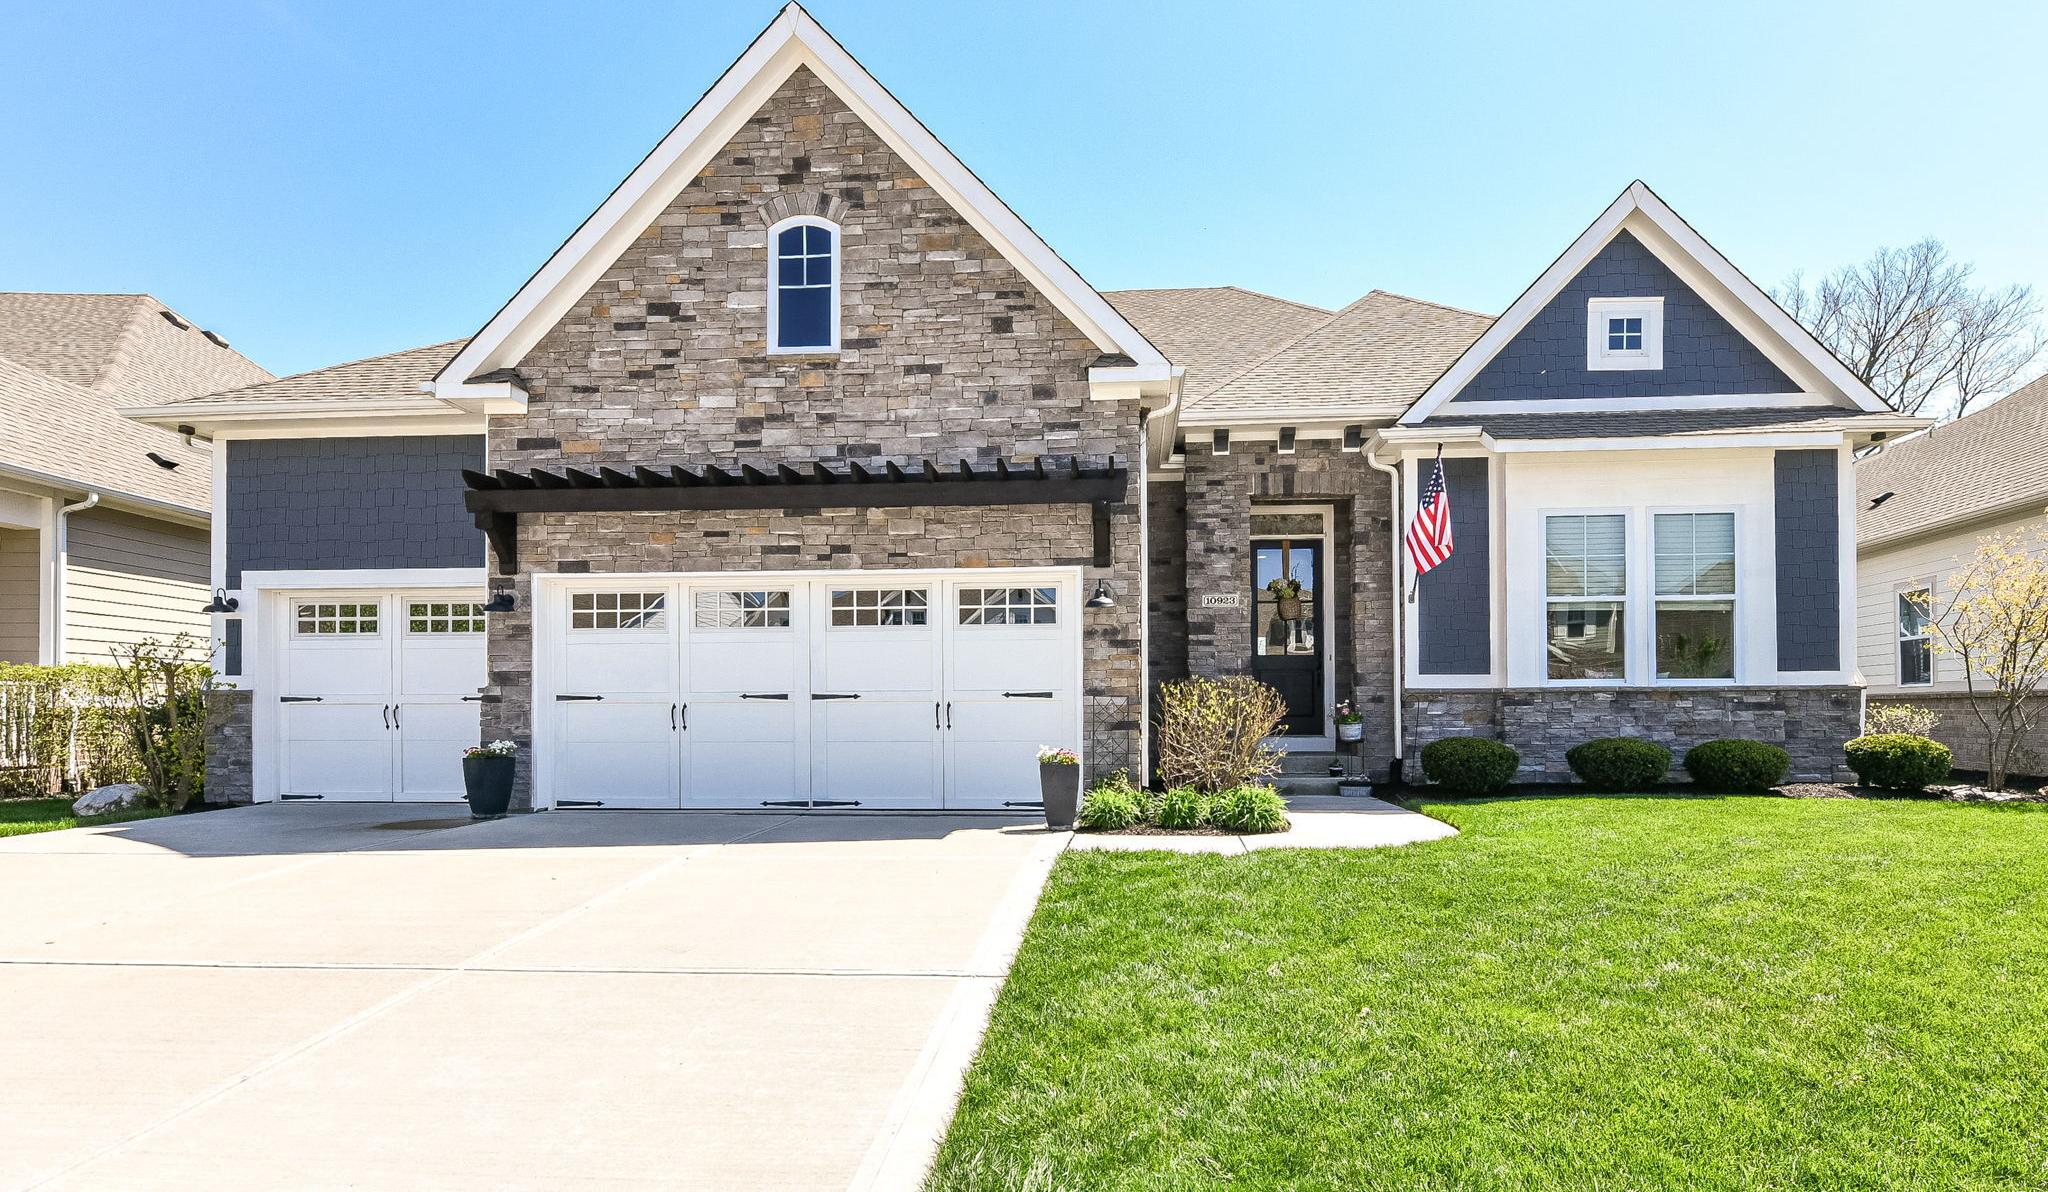 Photo one of 10923 Cliffside Dr Fishers IN 46040 | MLS 21973977